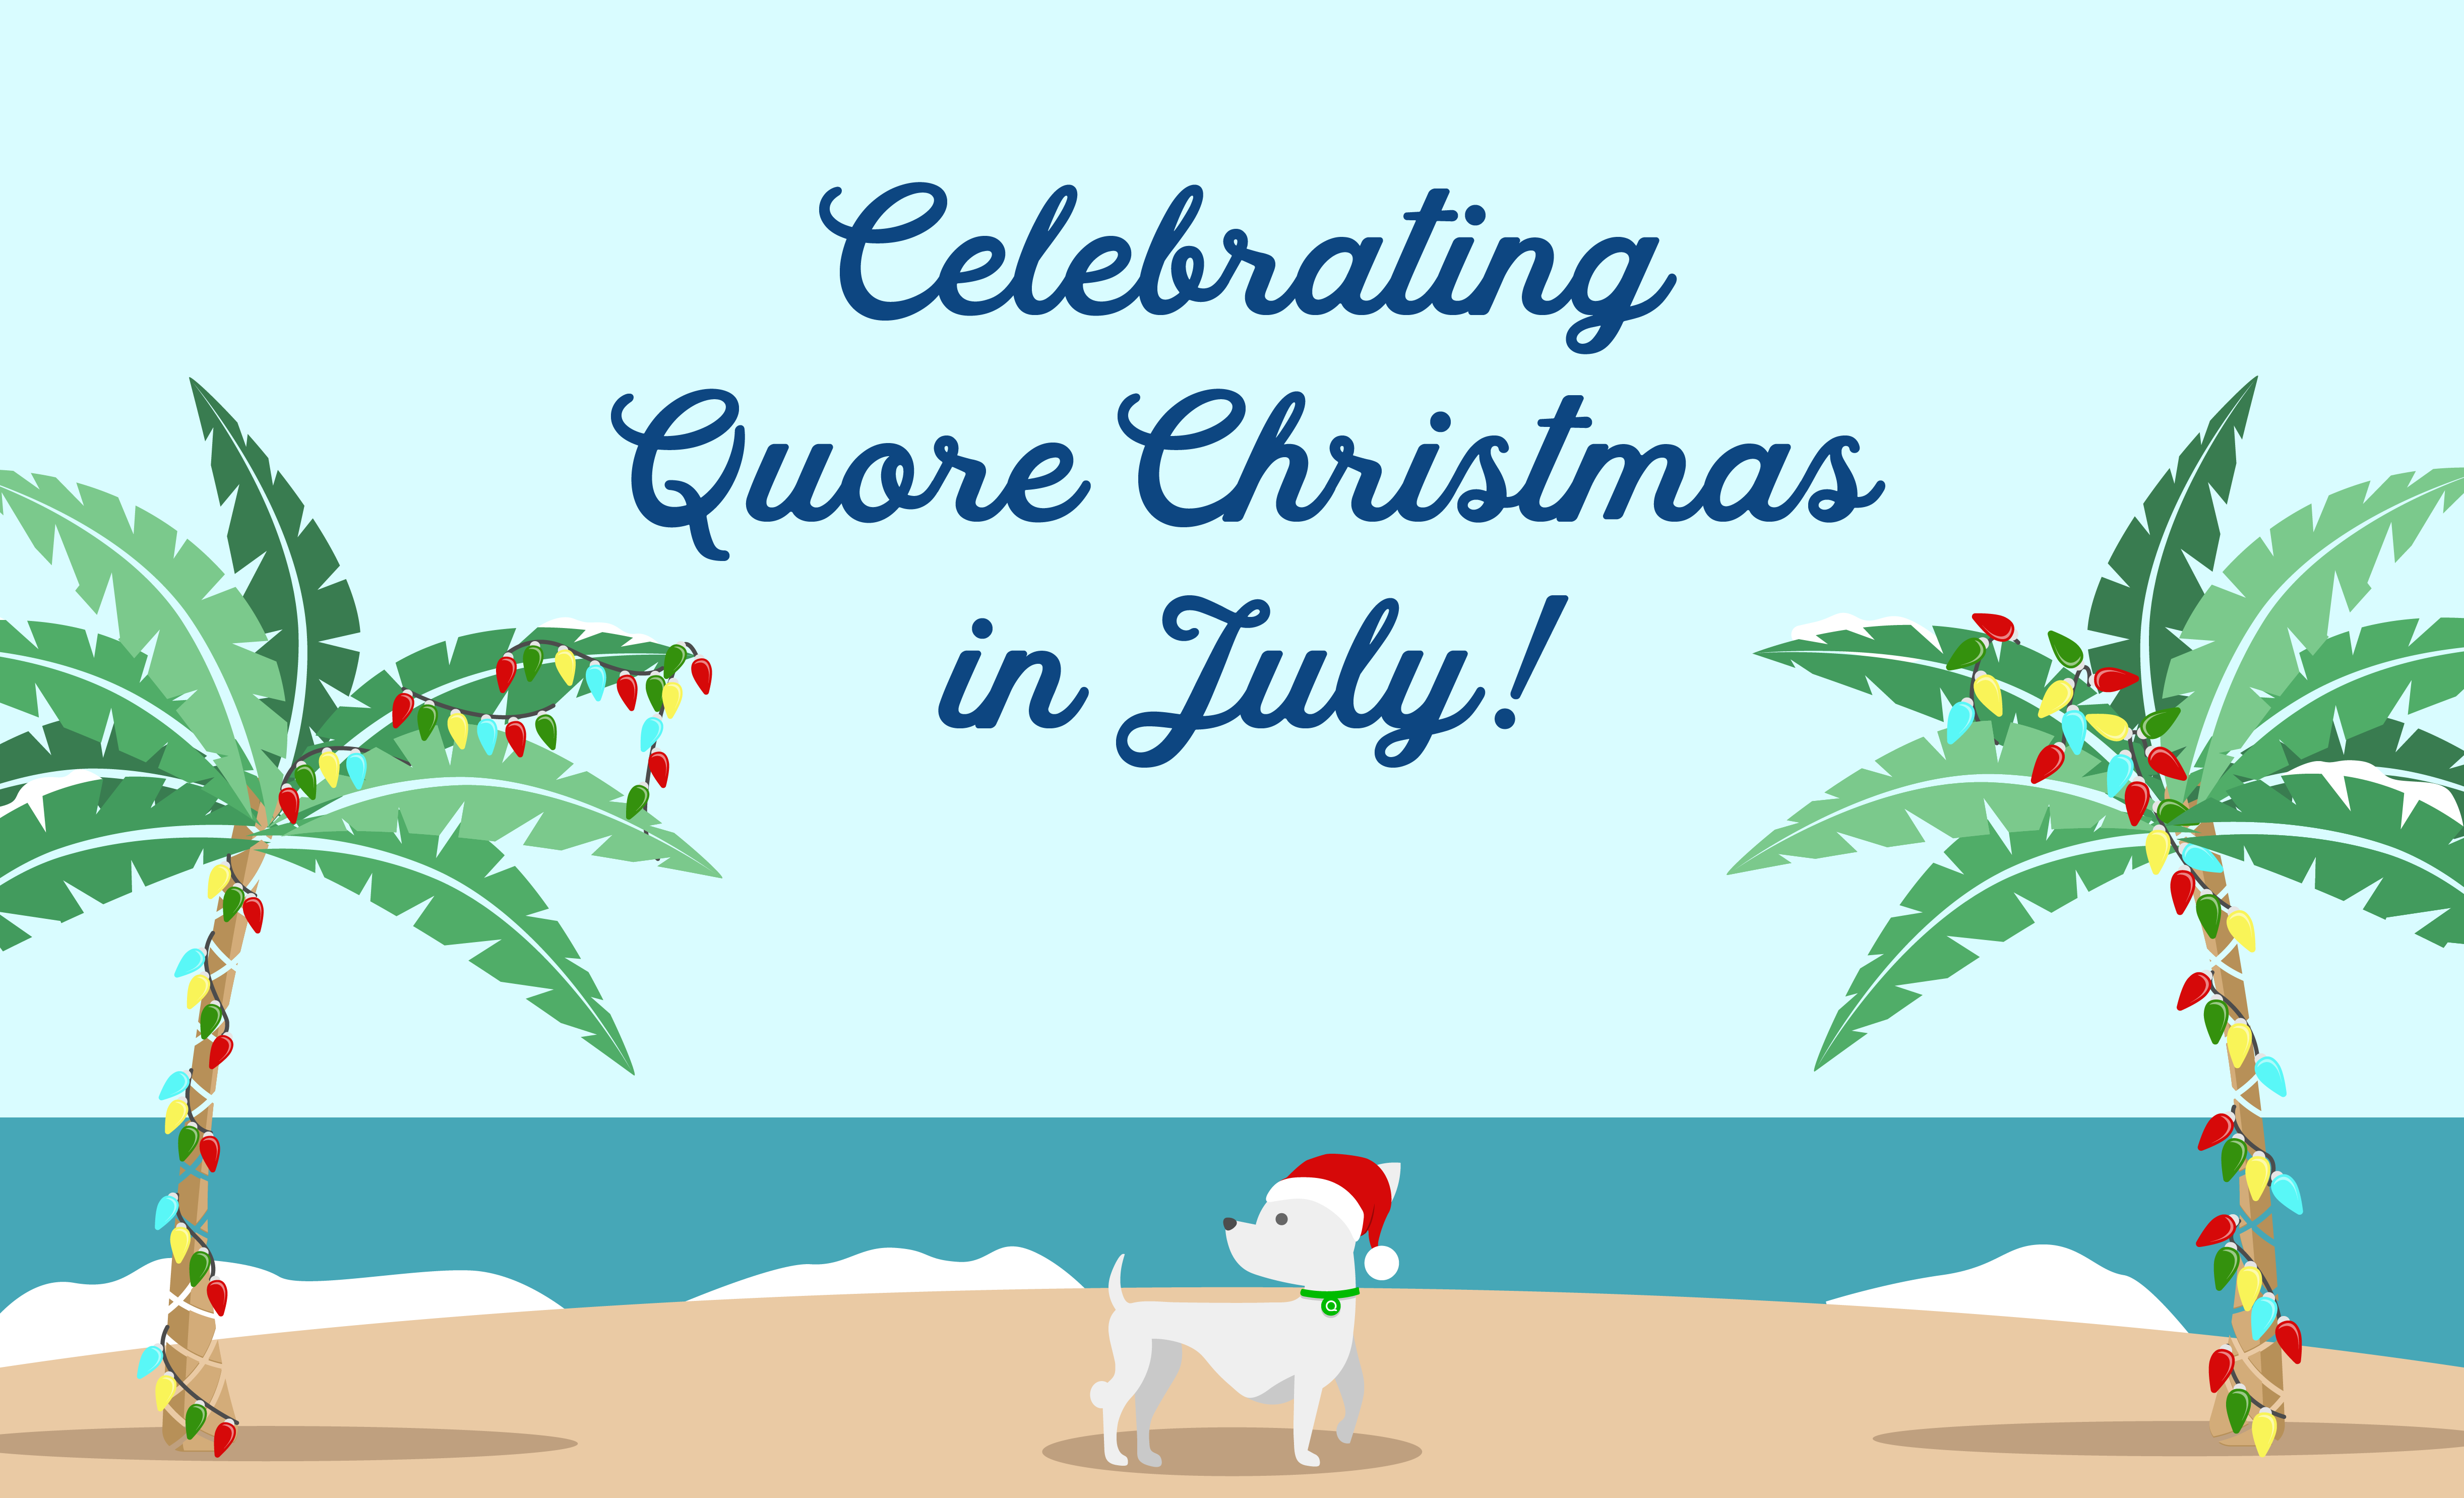 Celebrating Quore Christmas in July!